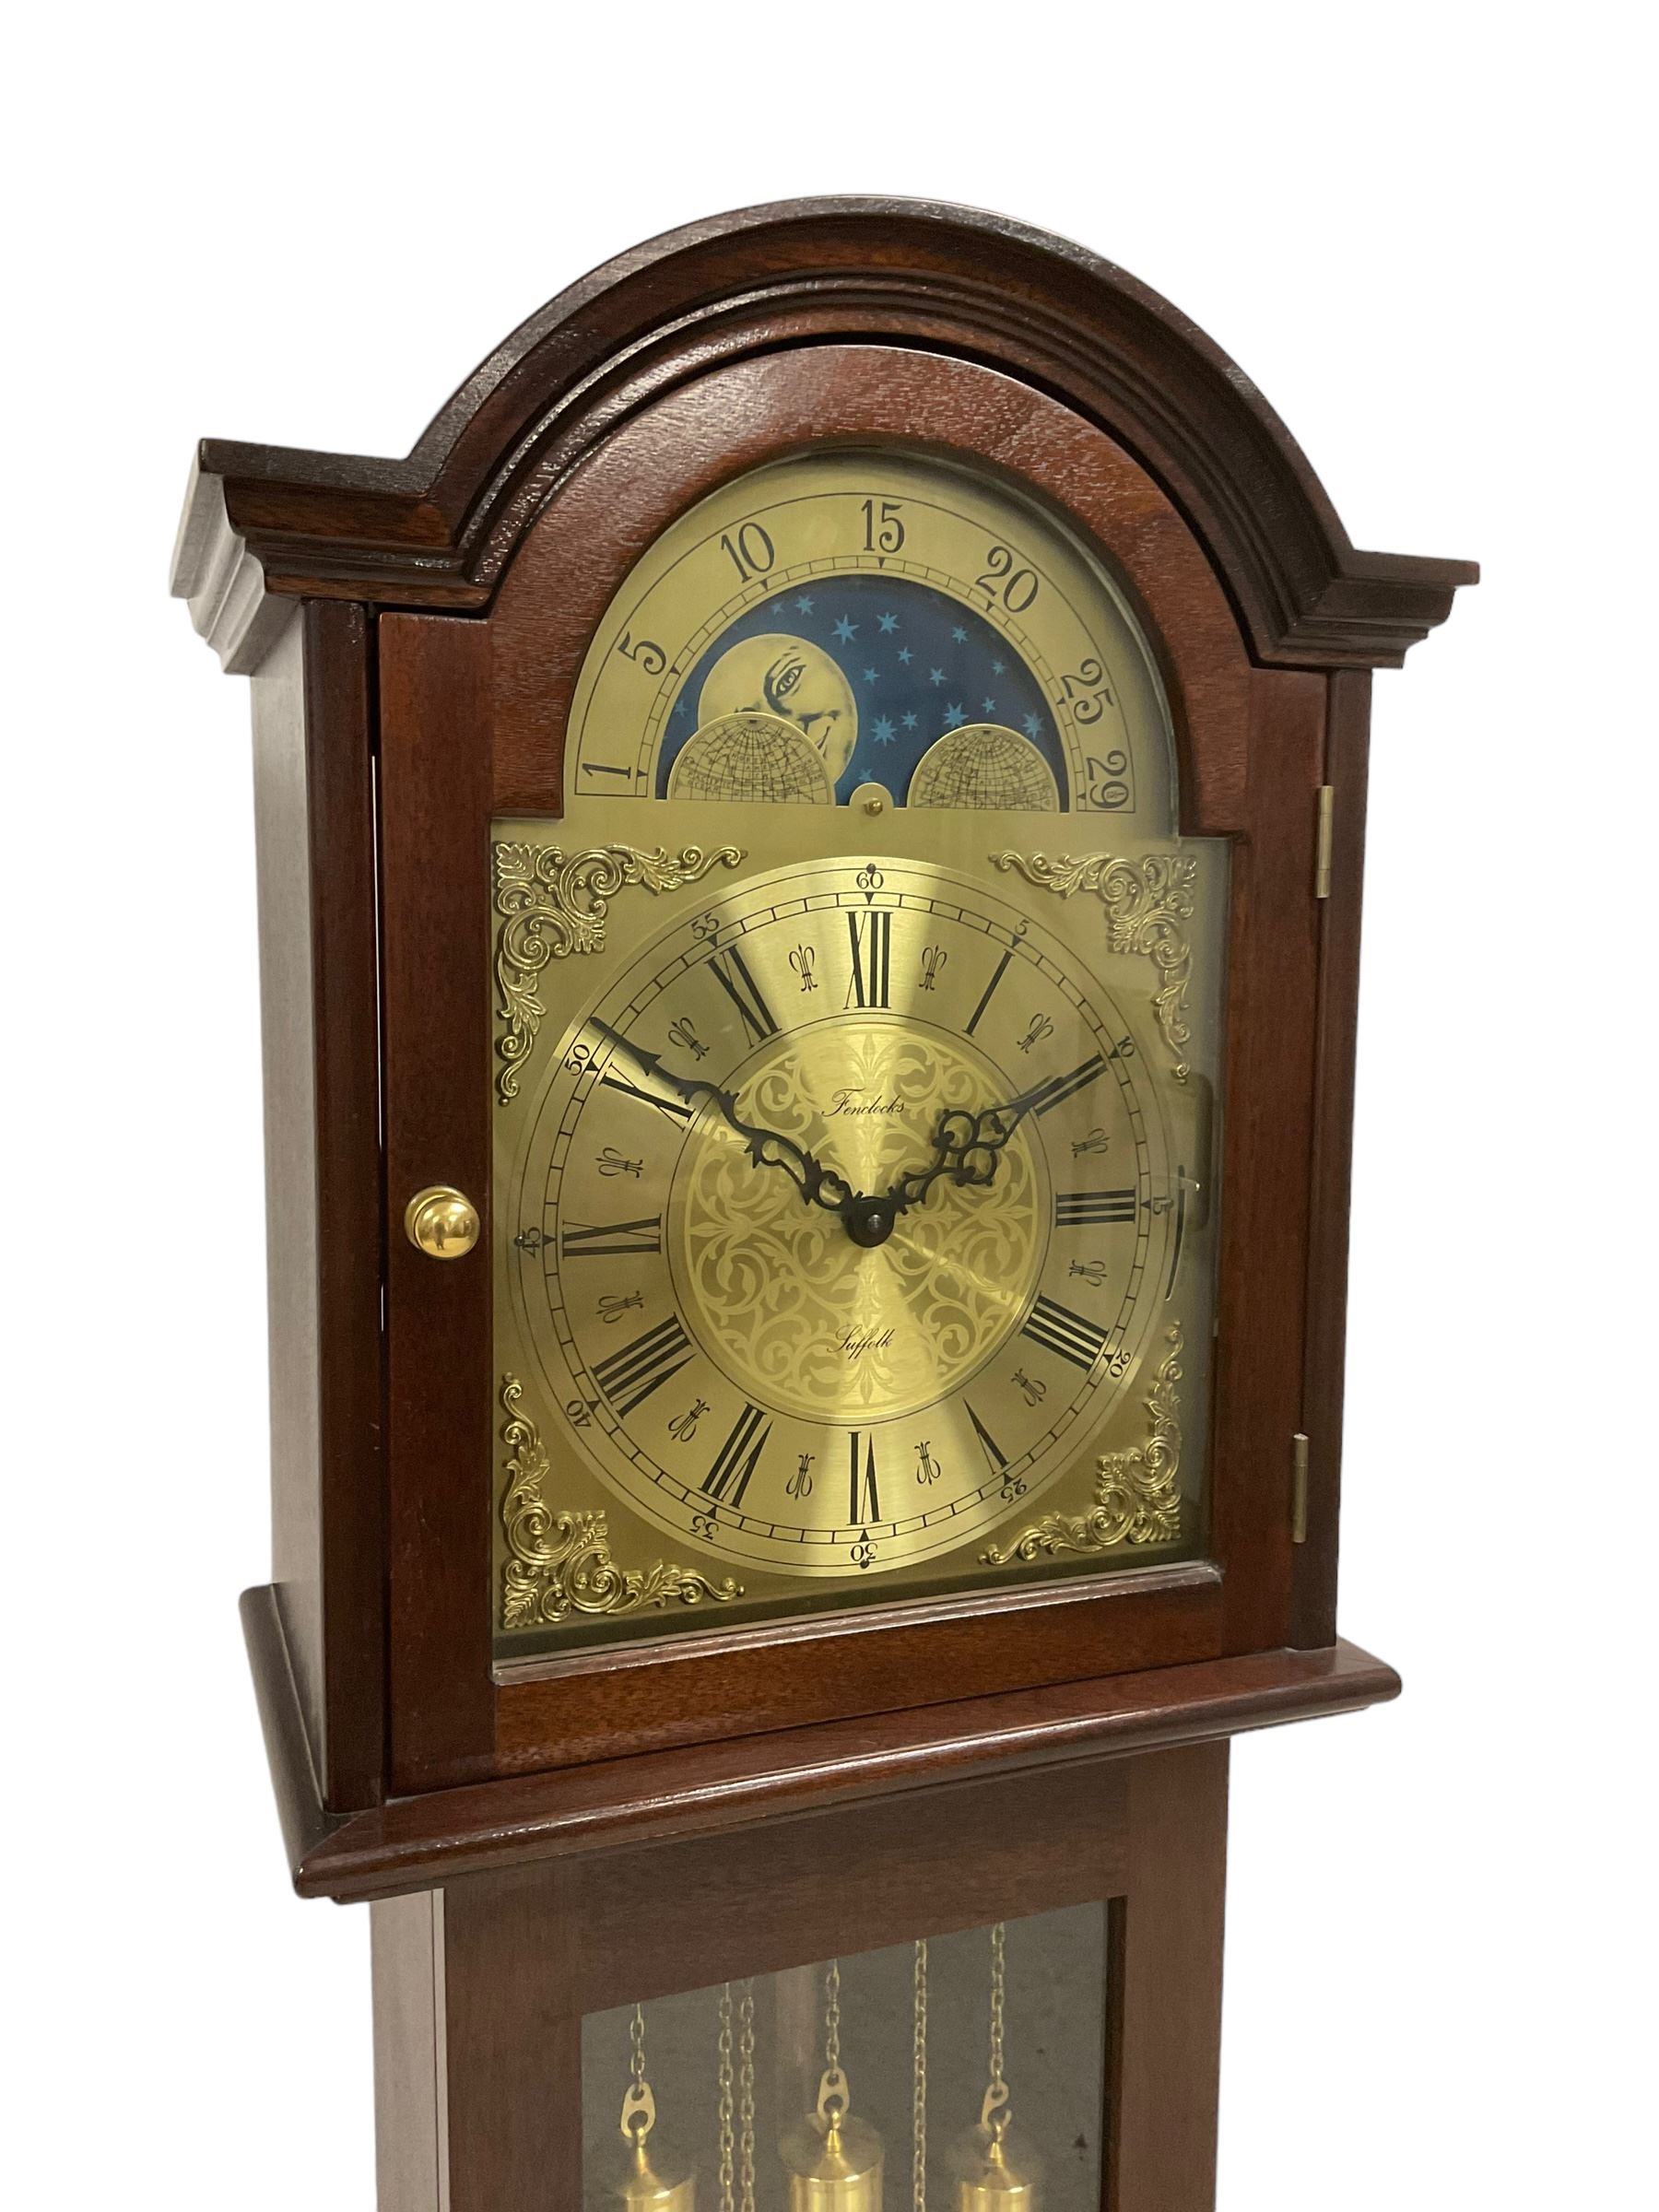 20th century - weight driven 8-day mahogany grandmother clock with a swans neck pediment and fully g - Image 4 of 6